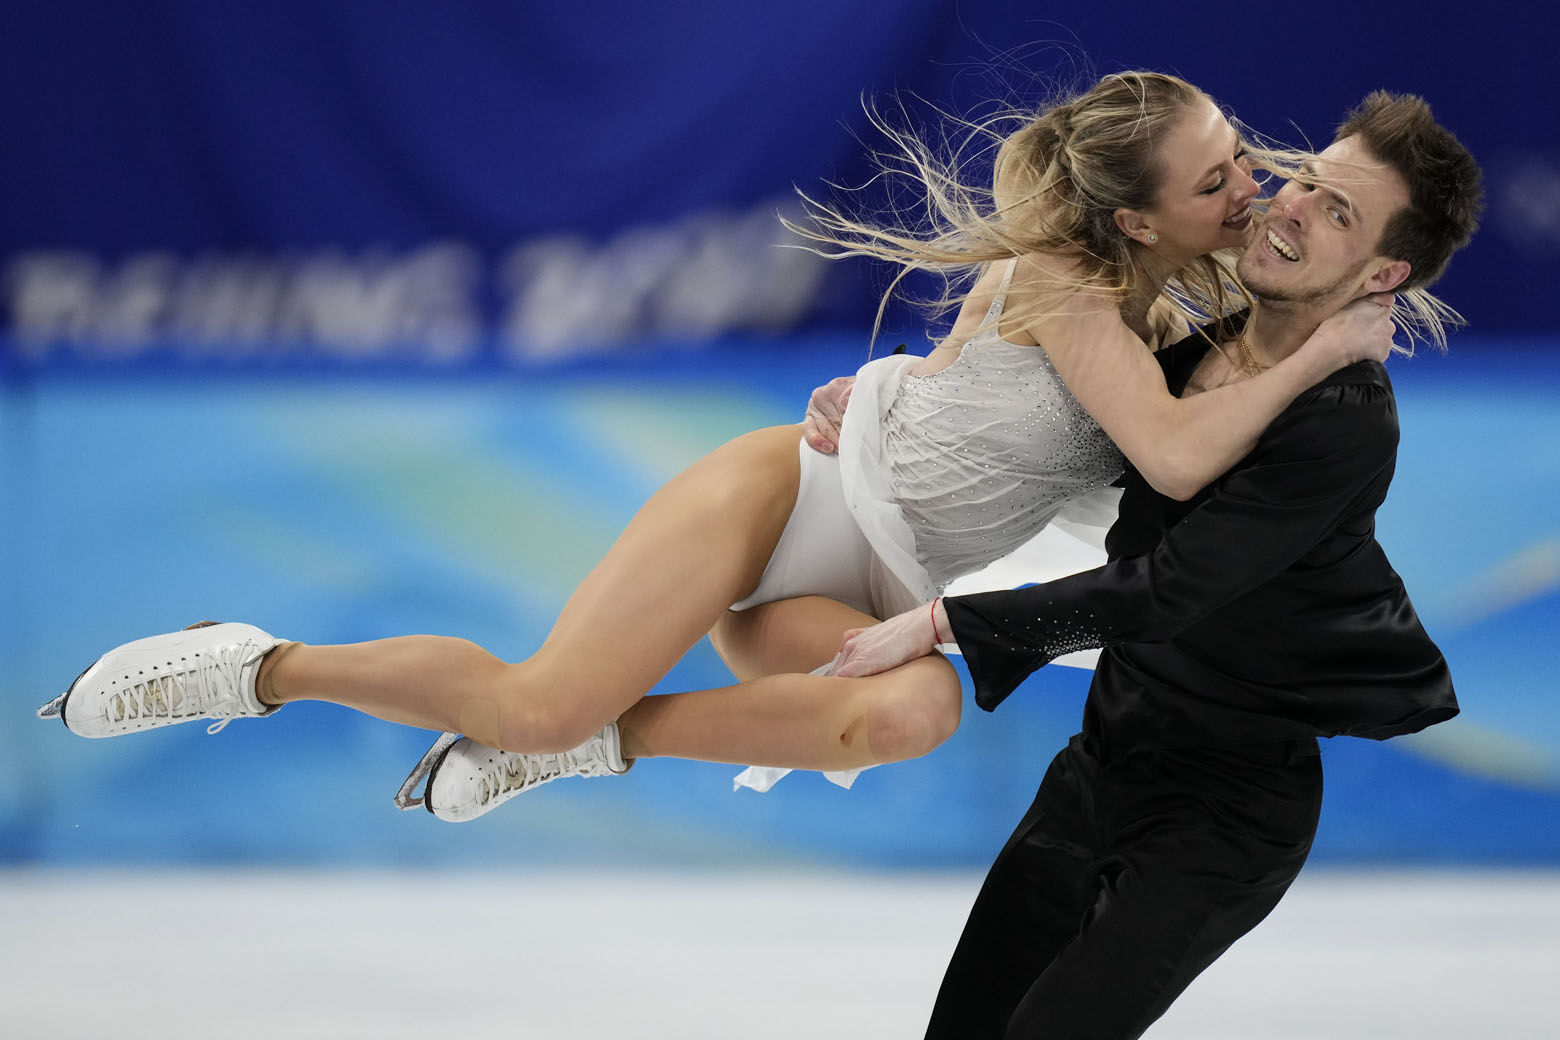 <p>Victoria Sinitsina and Nikita Katsalapov, of the Russian Olympic Committee, perform their routine in the ice dance competition during the figure skating at the 2022 Winter Olympics, Monday, Feb. 14, 2022, in Beijing.</p>
